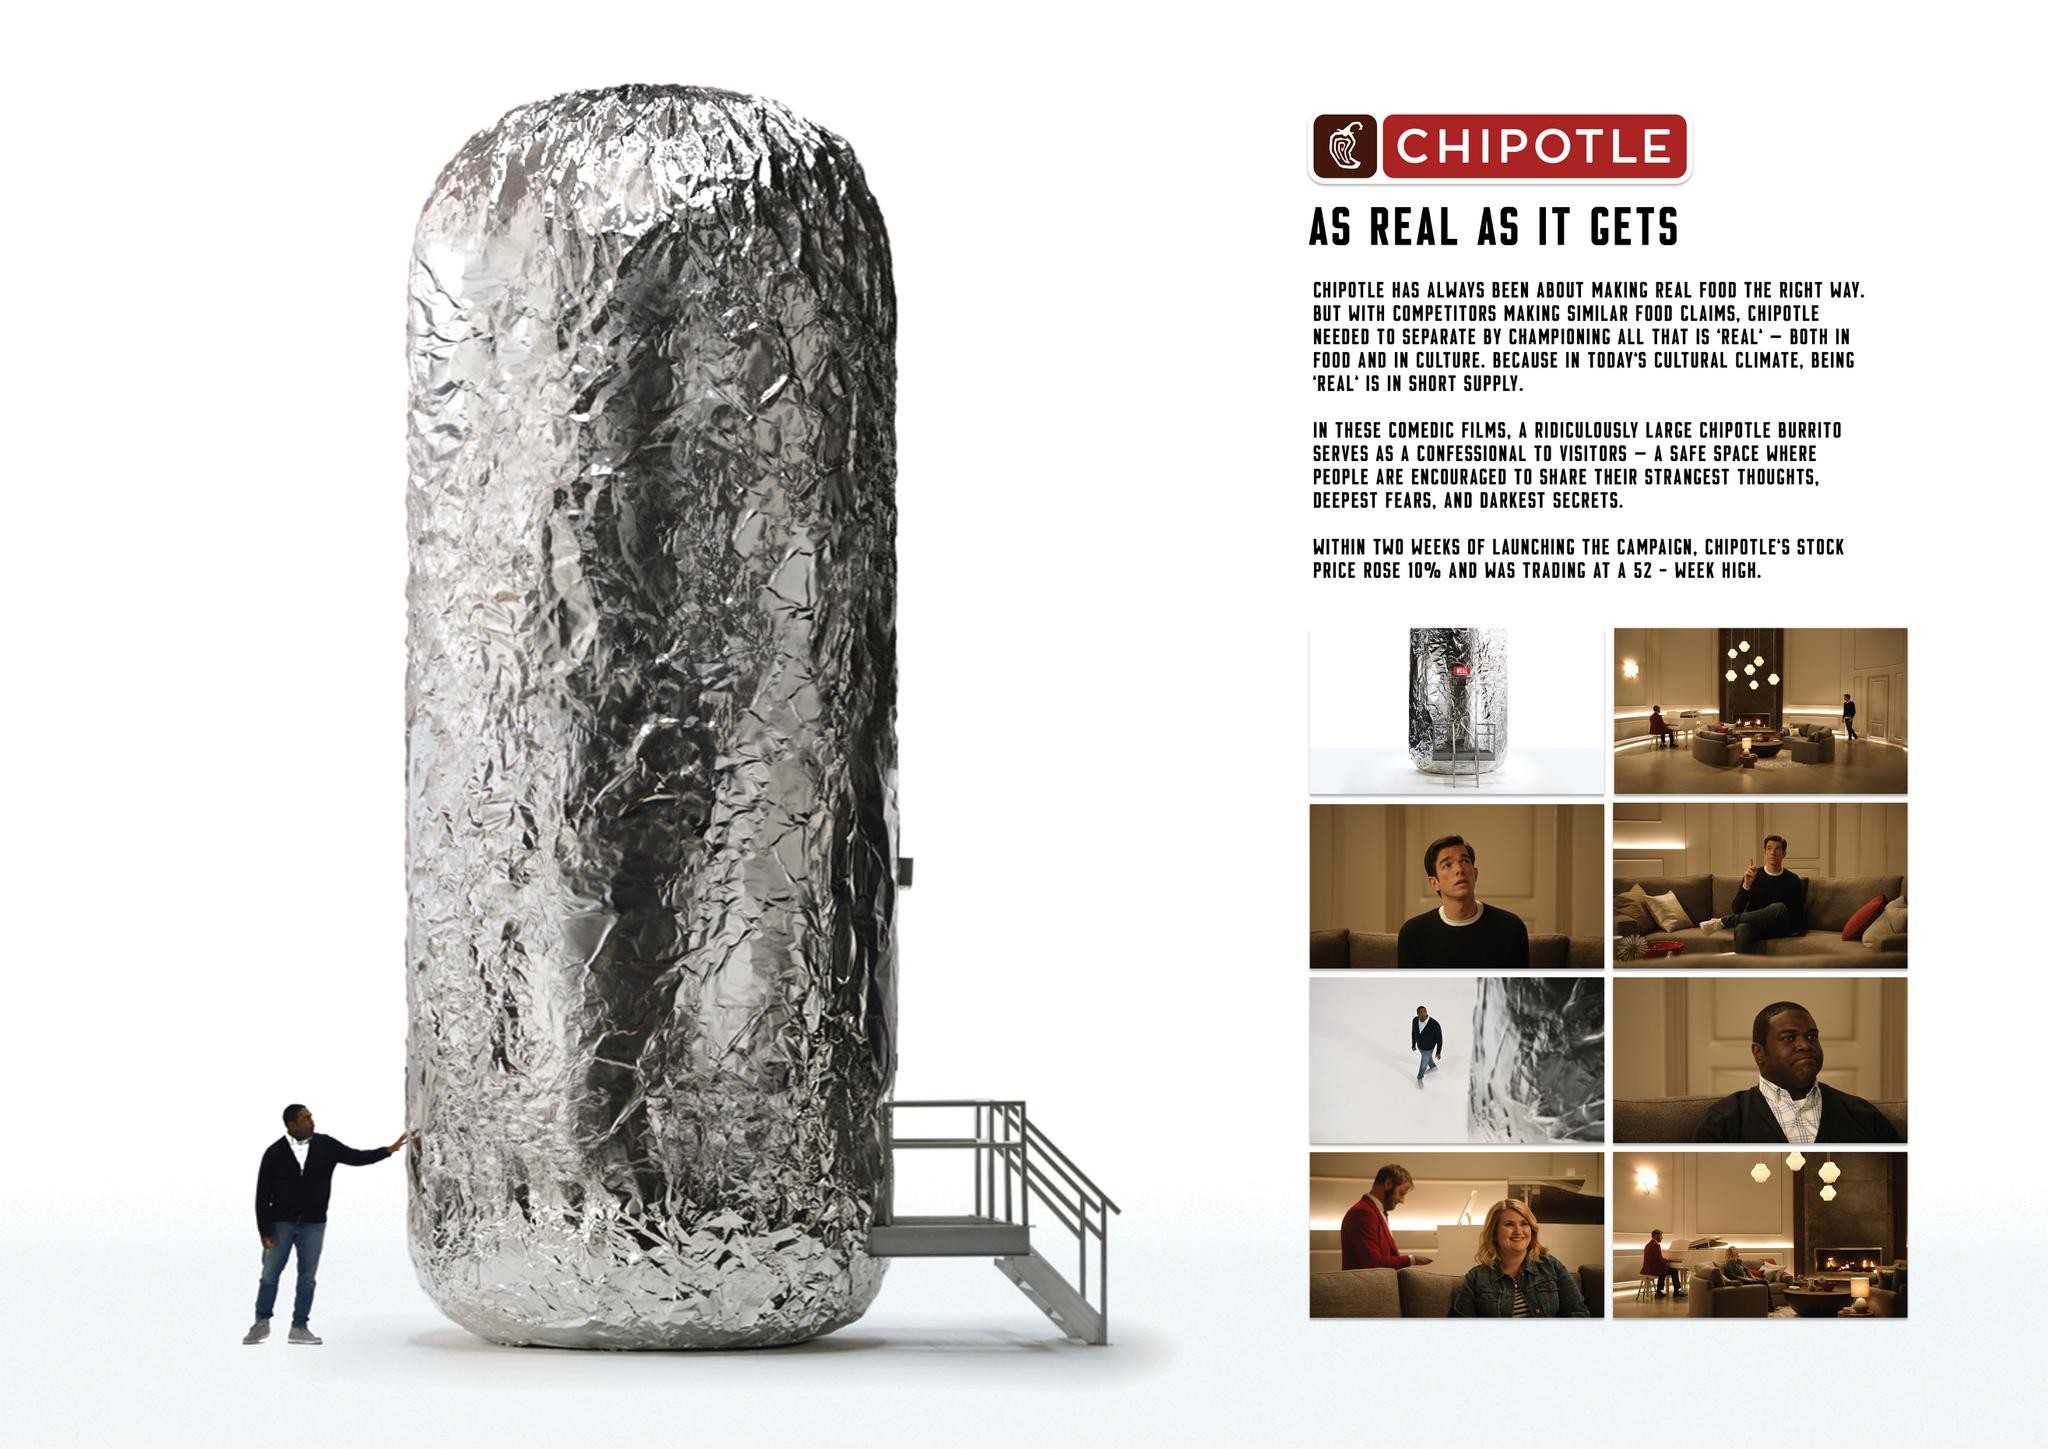 Chipotle "As Real As It Gets" Webisodes